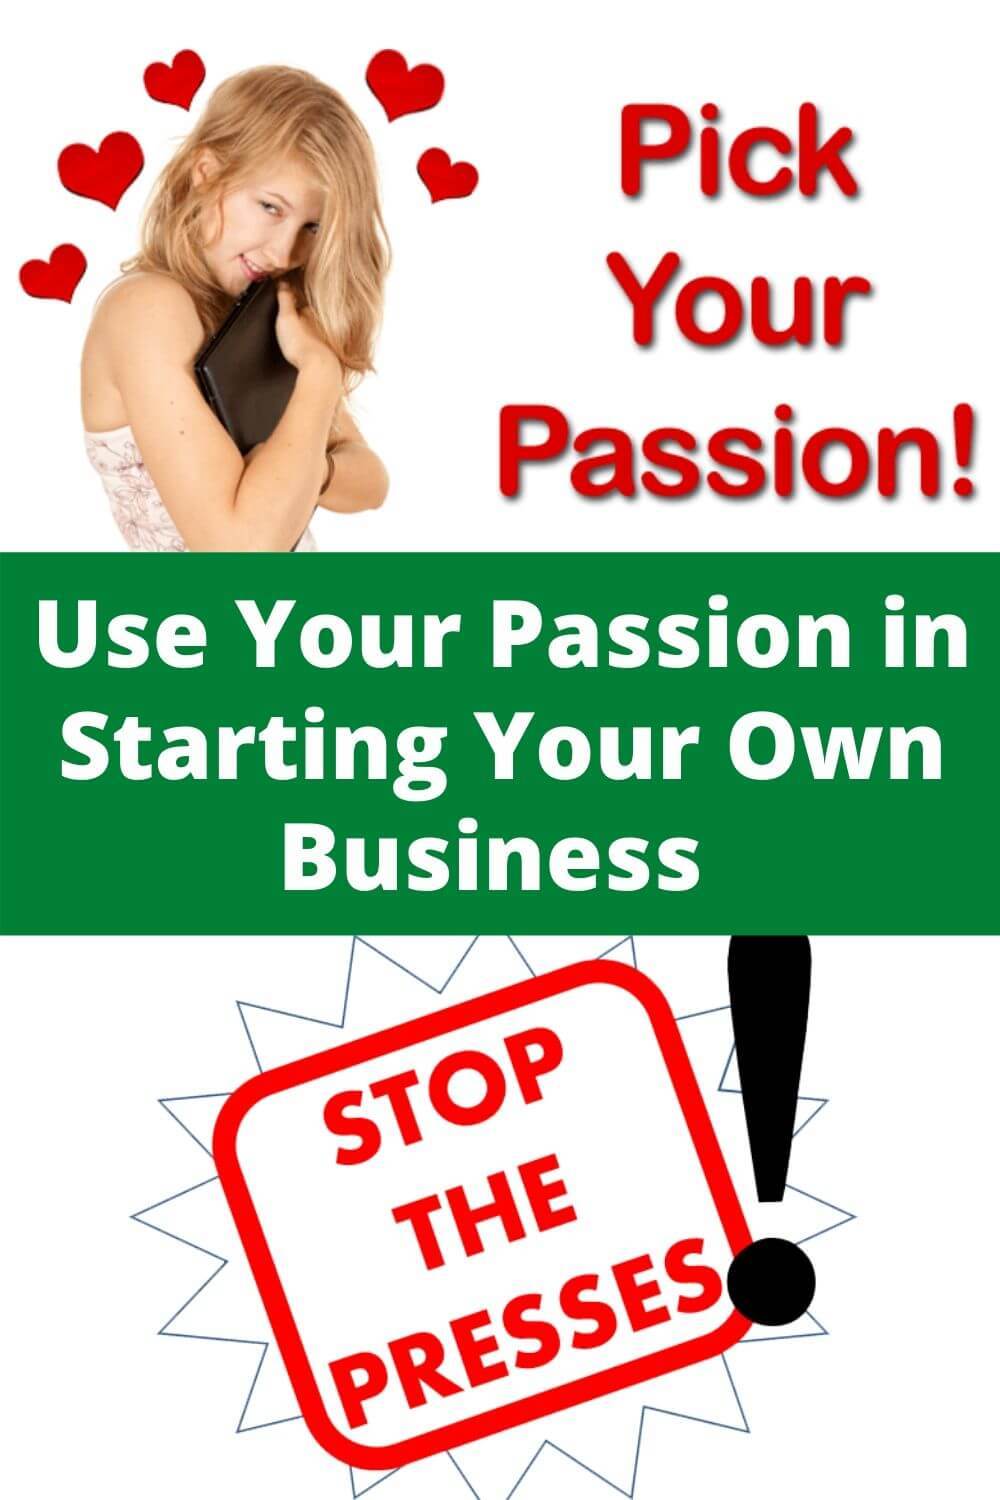 Use your passion in starting your own business